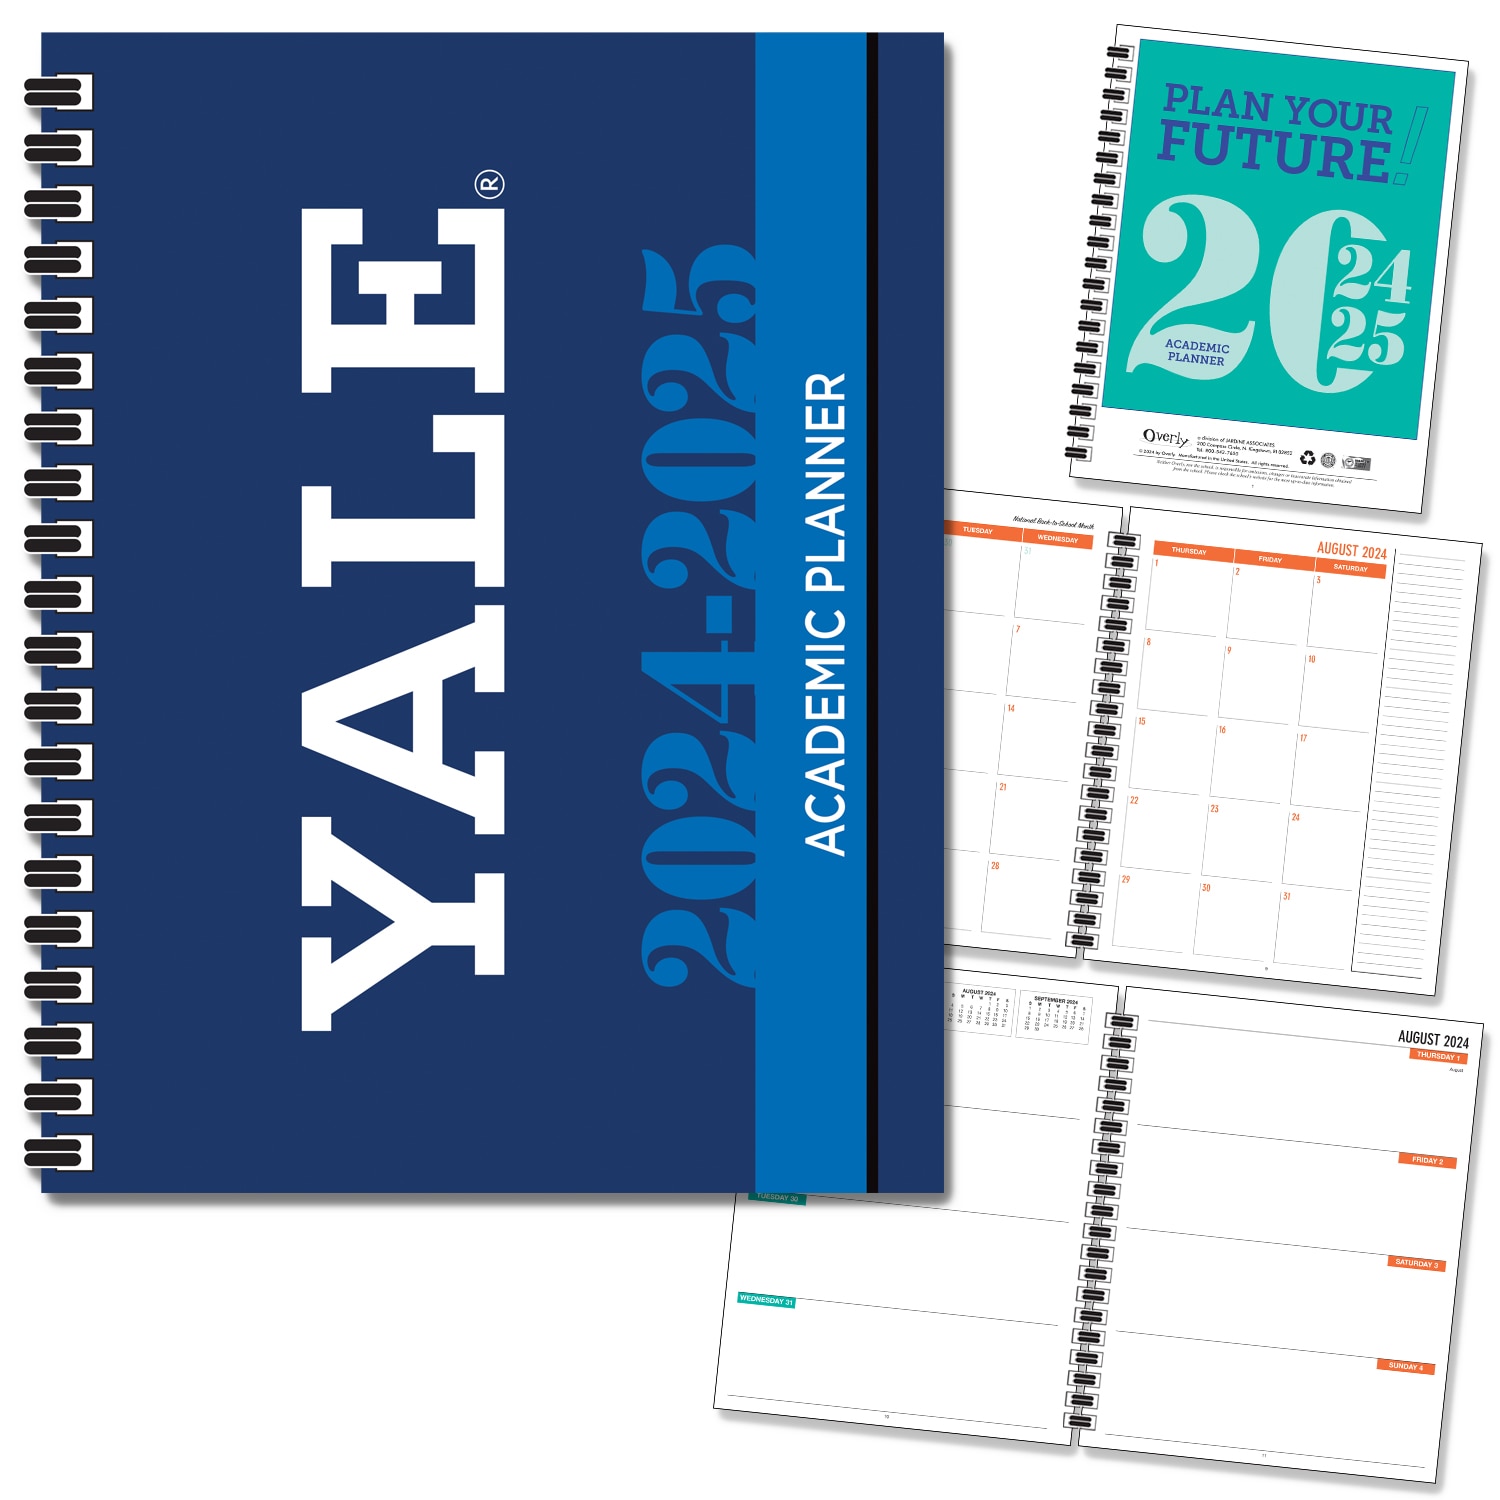 FY 25 Traditional Soft Touch Spot Varnish - School Name Imprinted Planner 24-25 AY 7x9